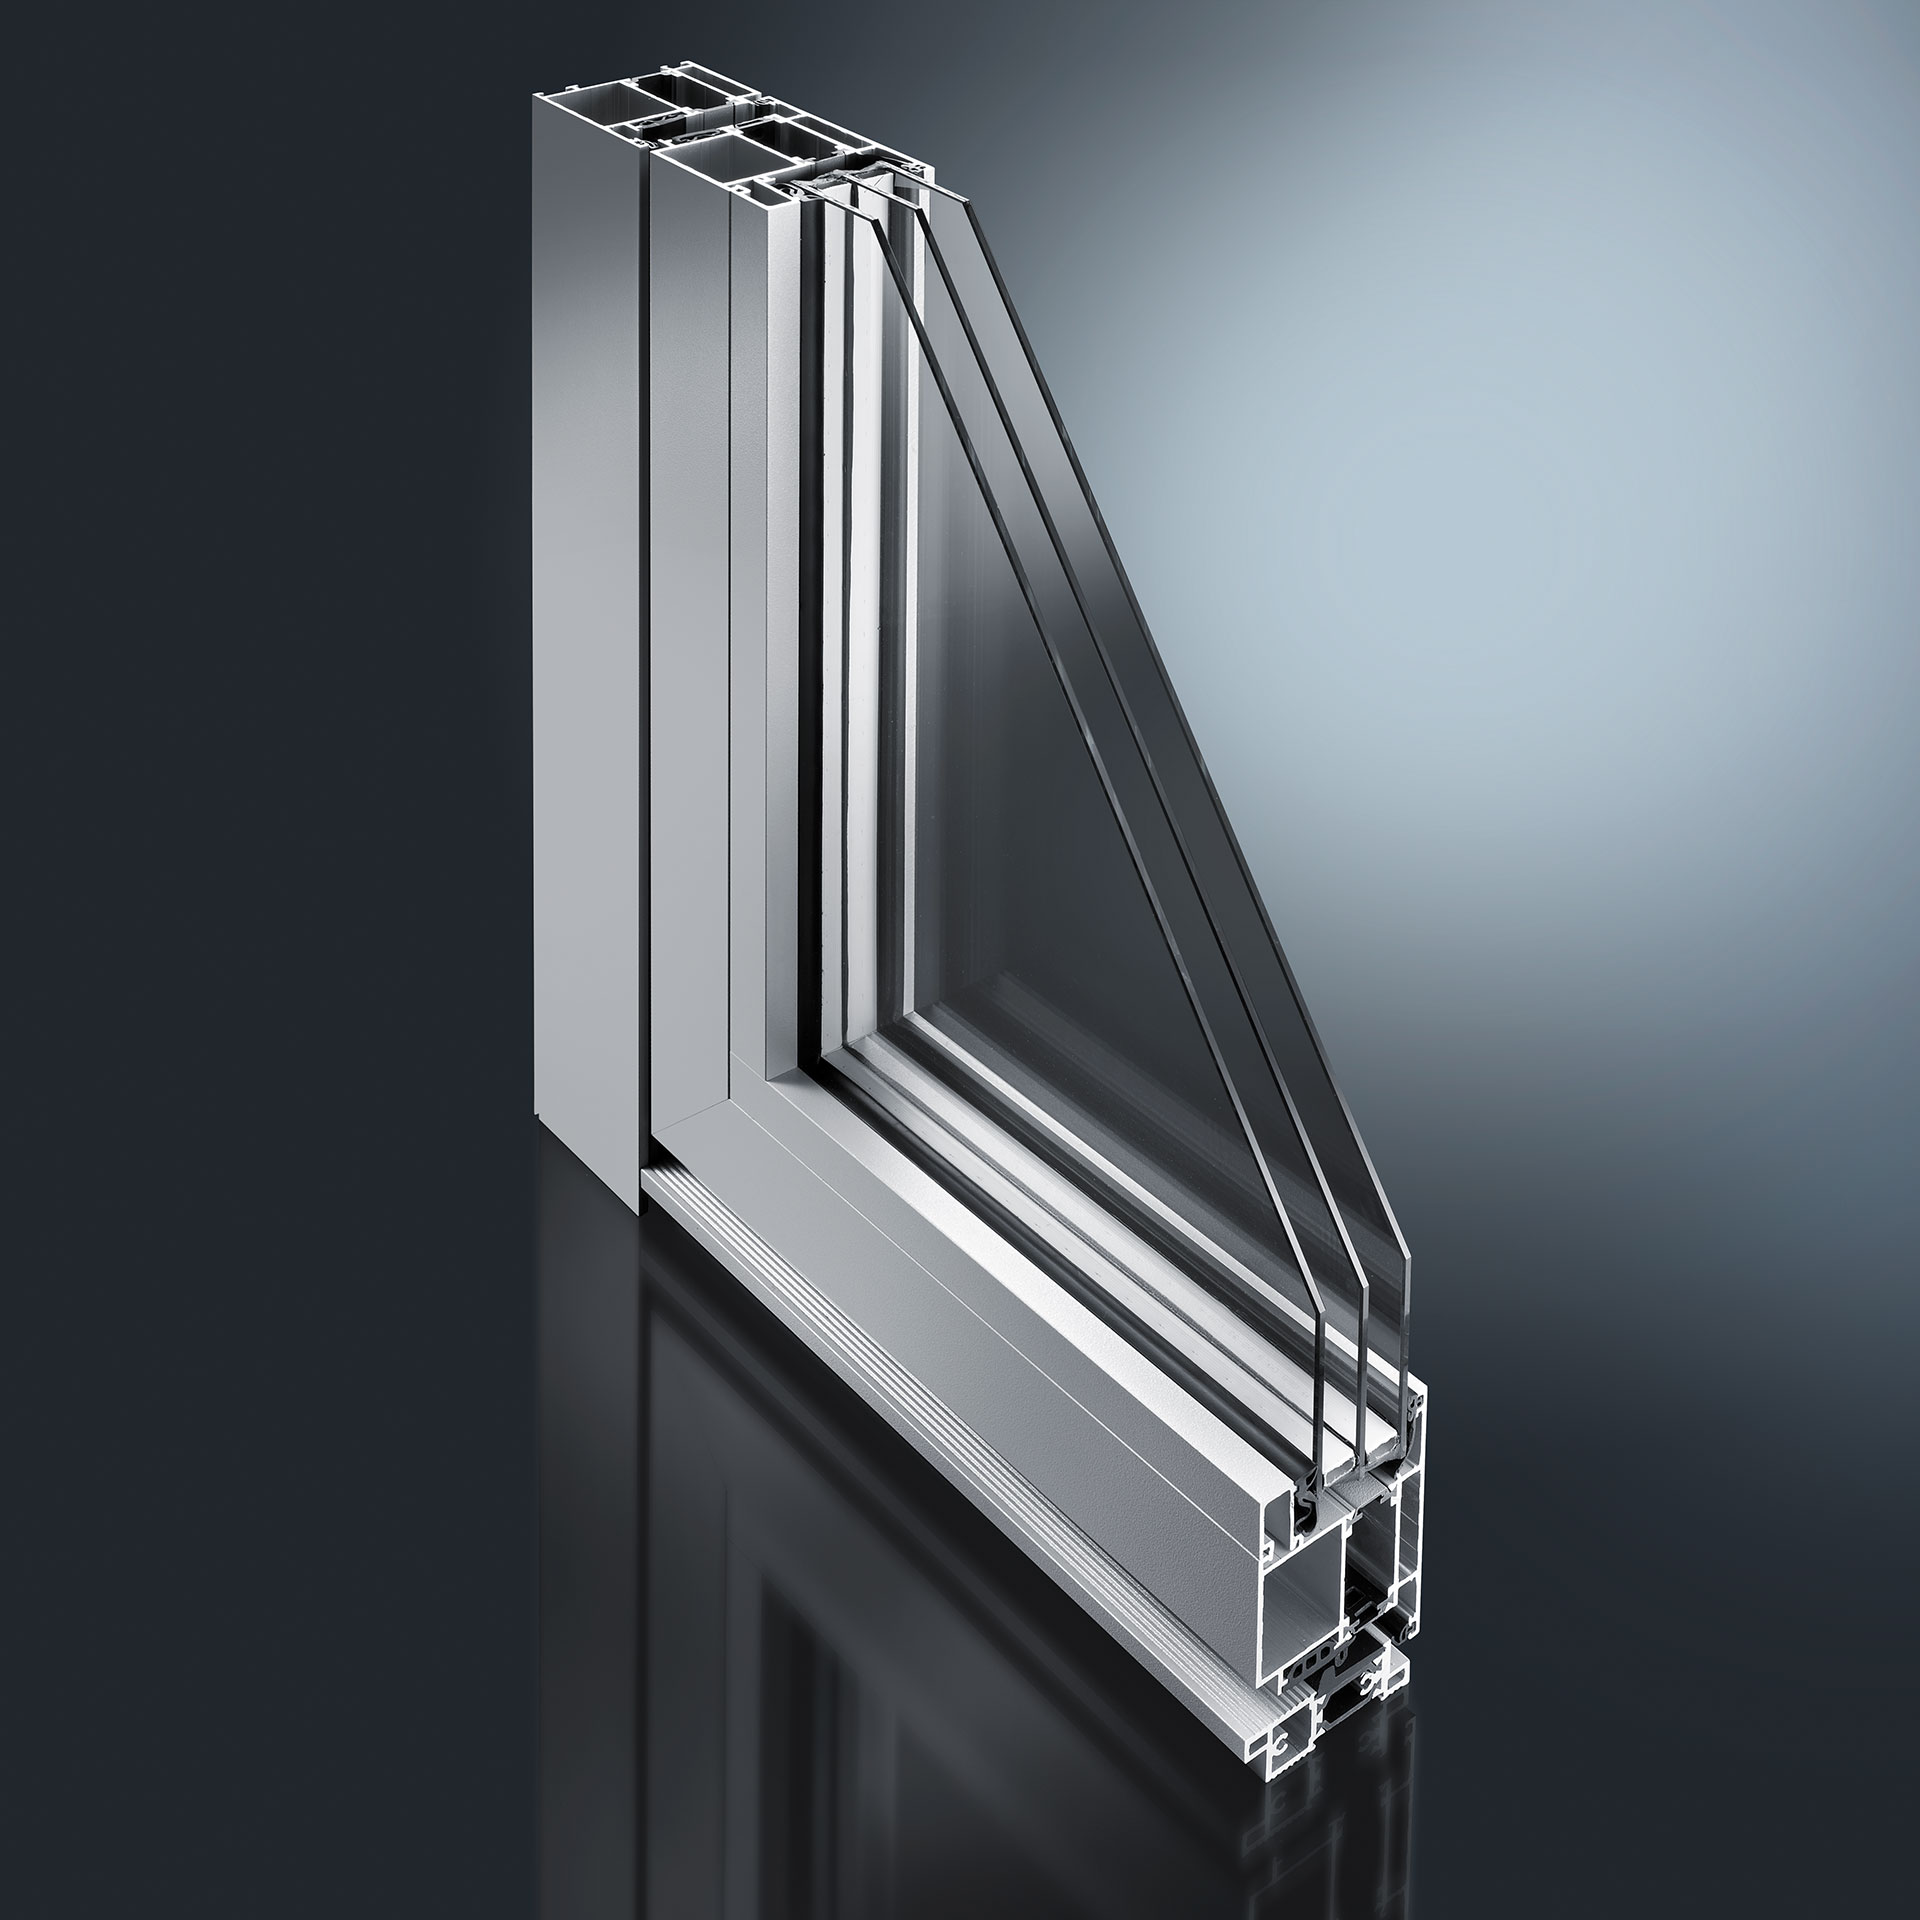 [Translate to EN_GB:] Profile systems for front doors and doors - We offer aluminium attachment shells for wood doors and modern standard models made of aluminium as well as profile system for separation and wall elements.